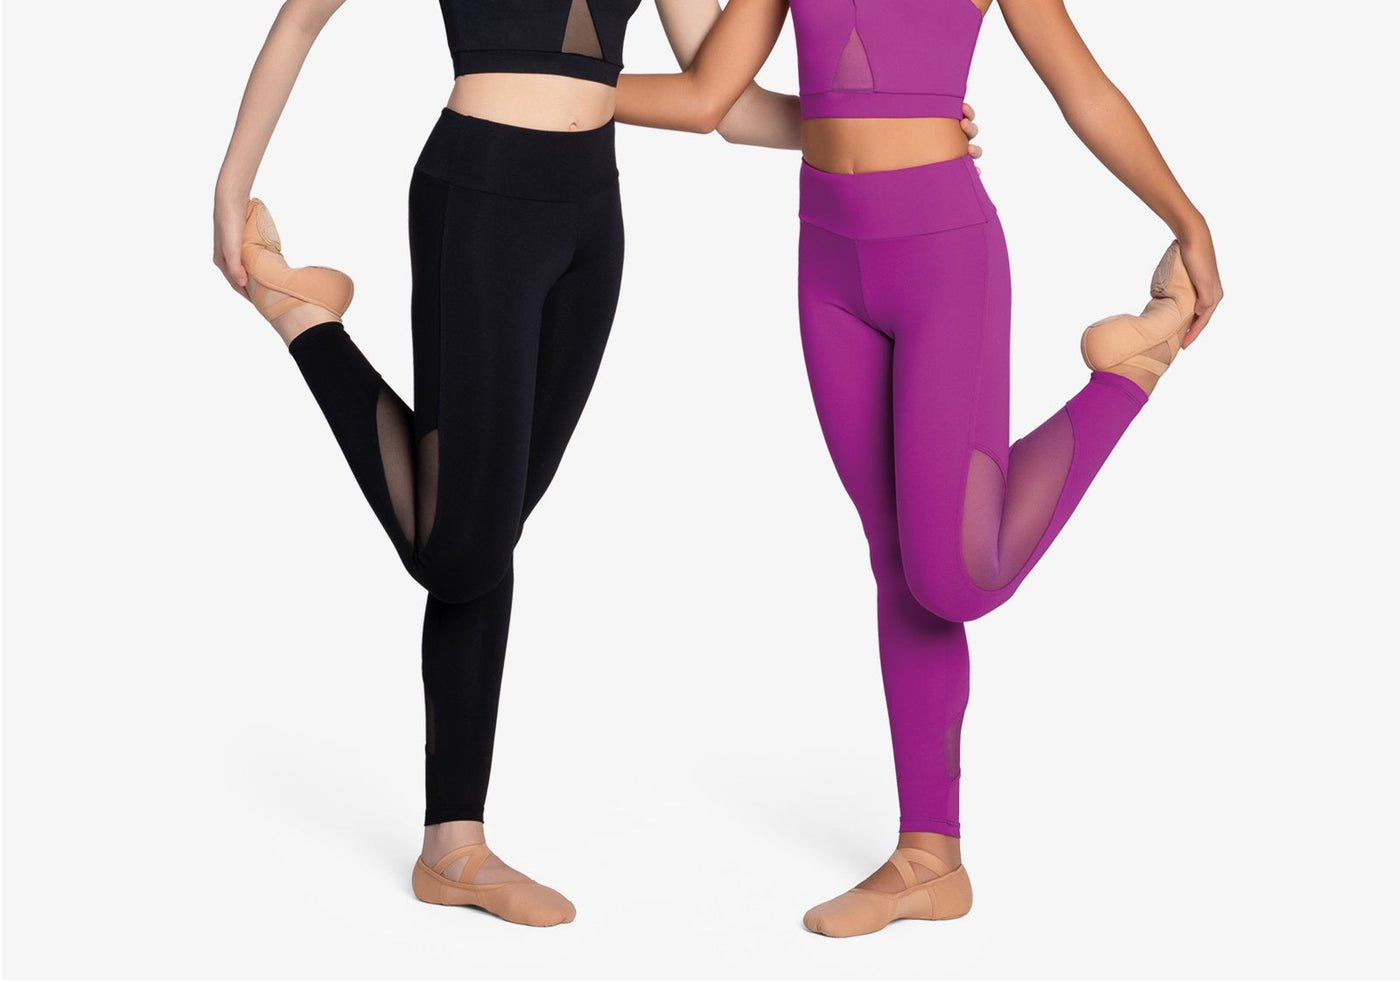 These Amazon Yoga Pants Are Under $20 and Look Like Fancy $90 Leggings